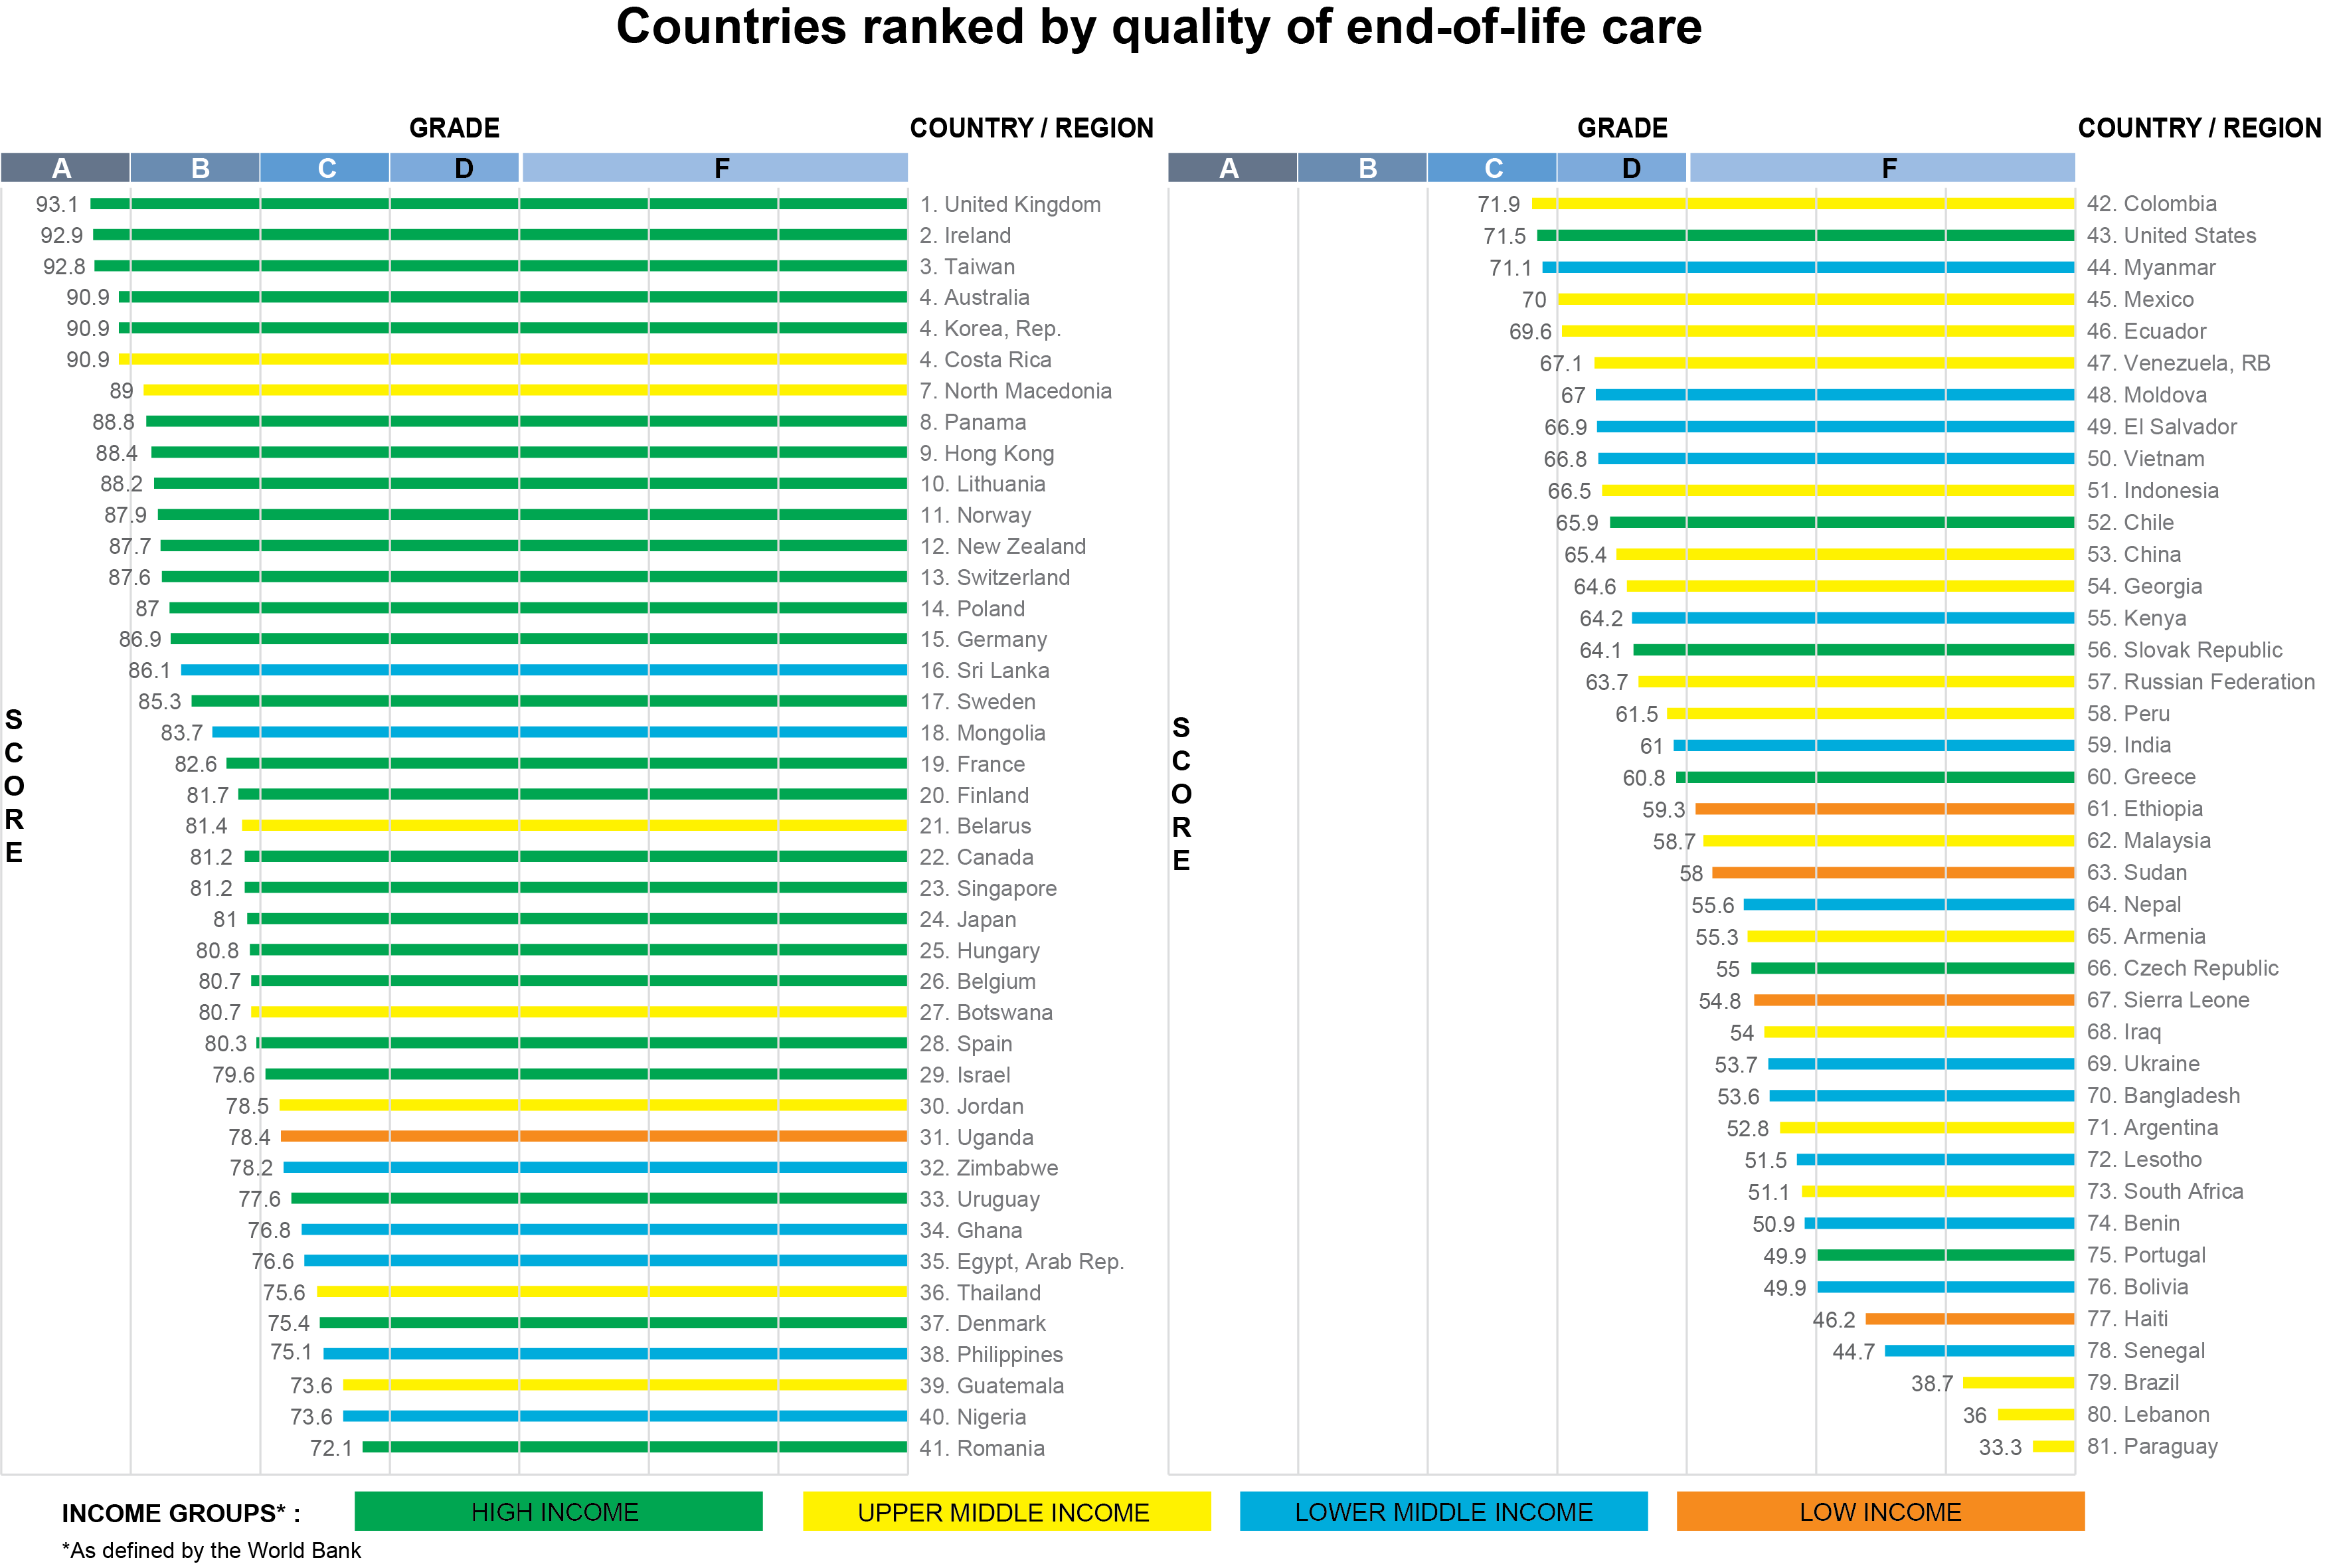 Country rankings based on EOL quality survey